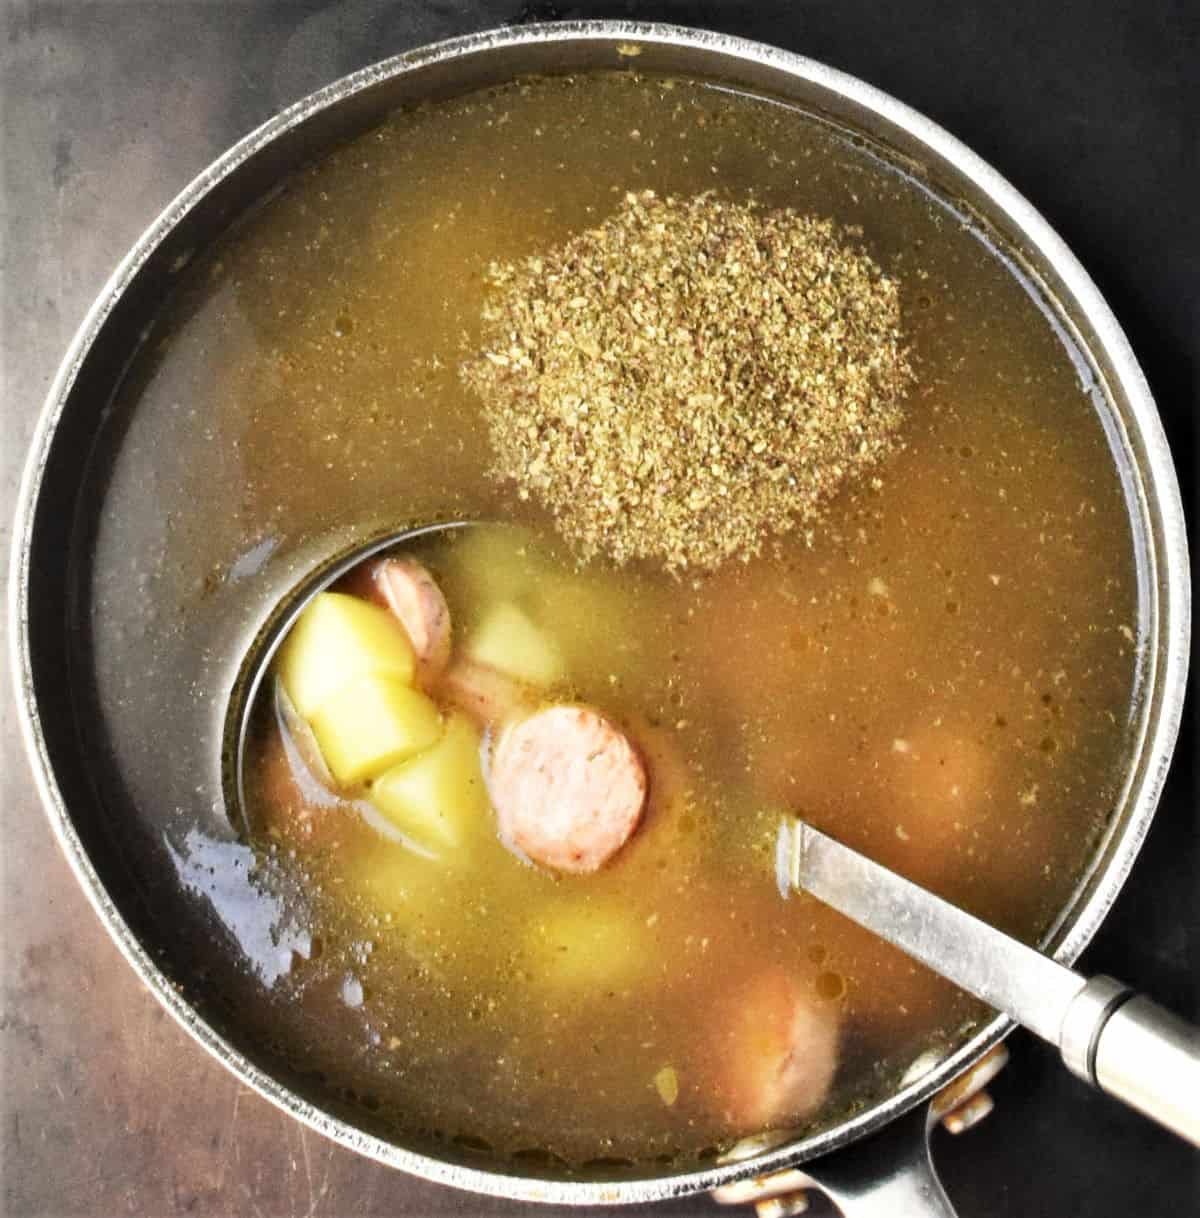 Broth with potatoes. herbs and sausages in pot with ladle.